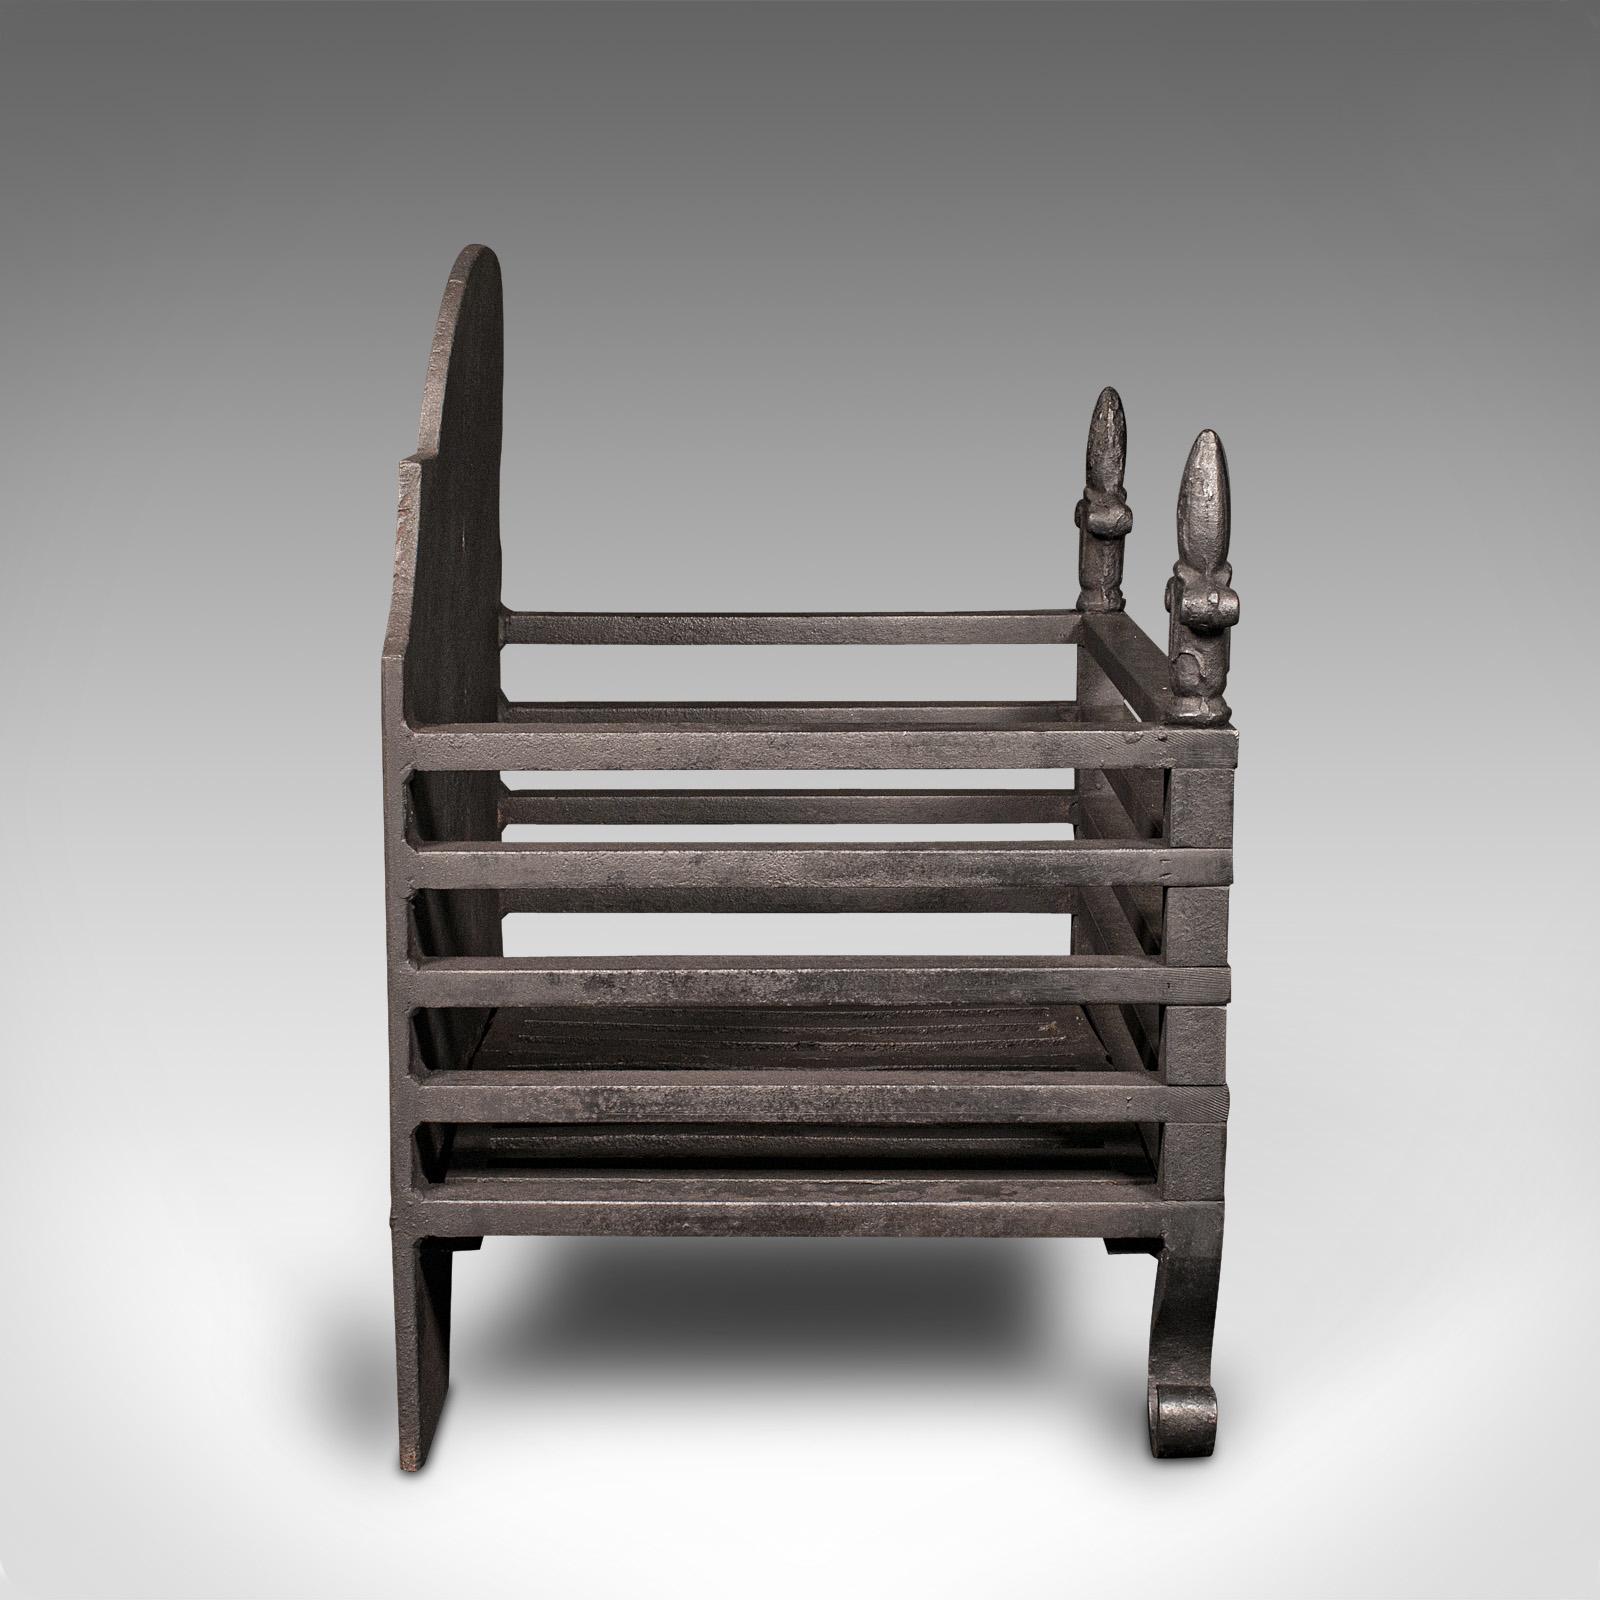 British Antique Fire Grate, English, Cast Iron, Fireplace, Basket, Late Victorian, 1900